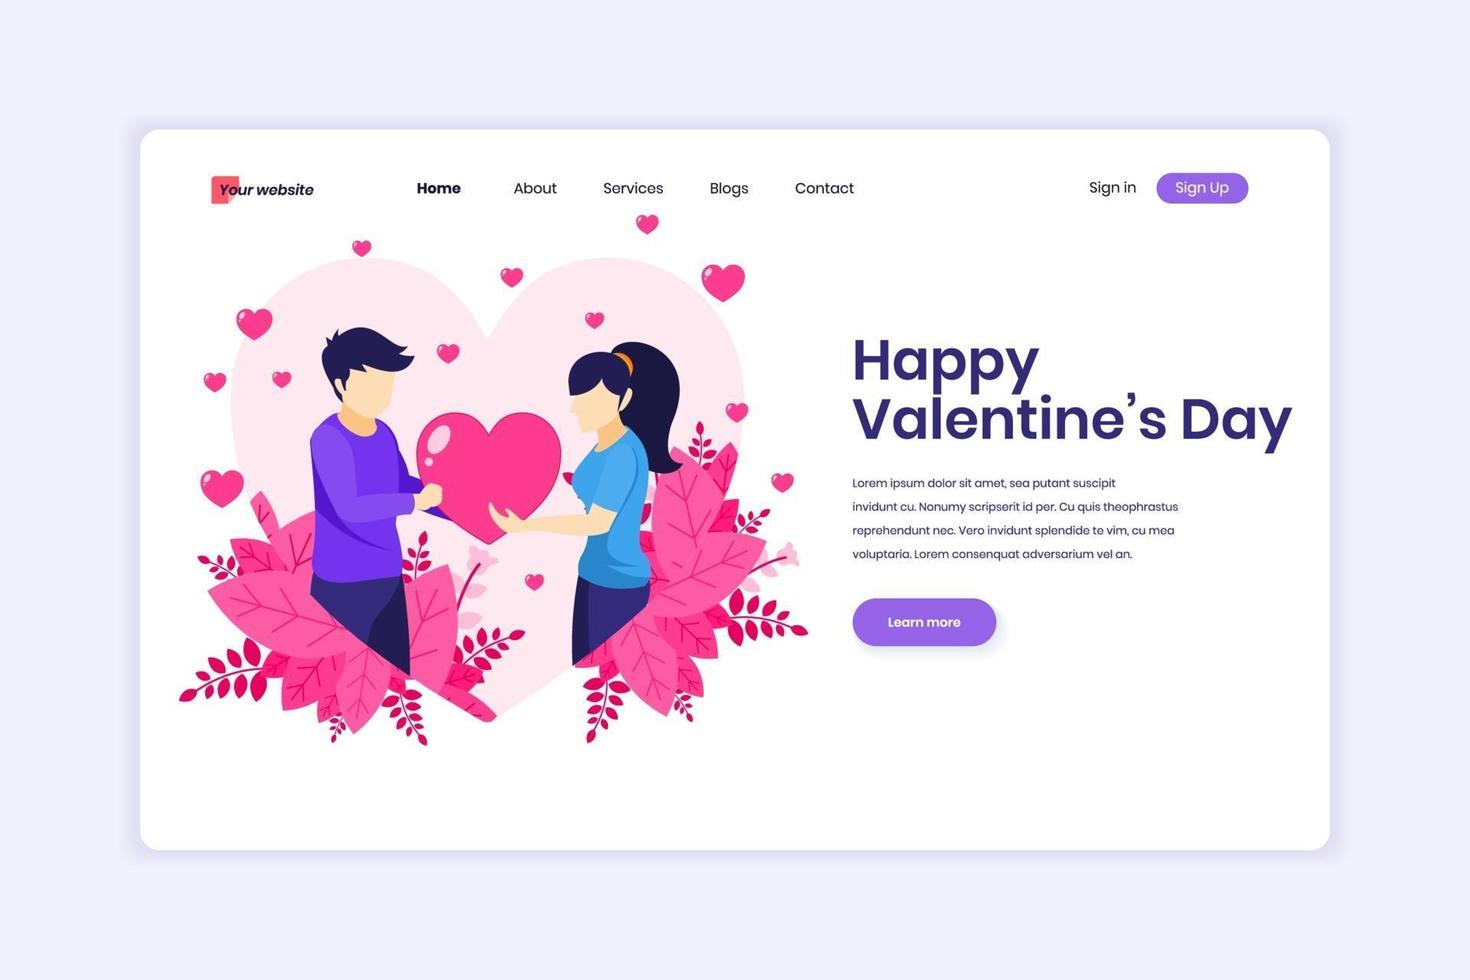 Landing page design concept of Valentine's Day Celebration, A man is expressing love by giving a heart symbol to a woman. Man and Woman in Relations. vector illustration